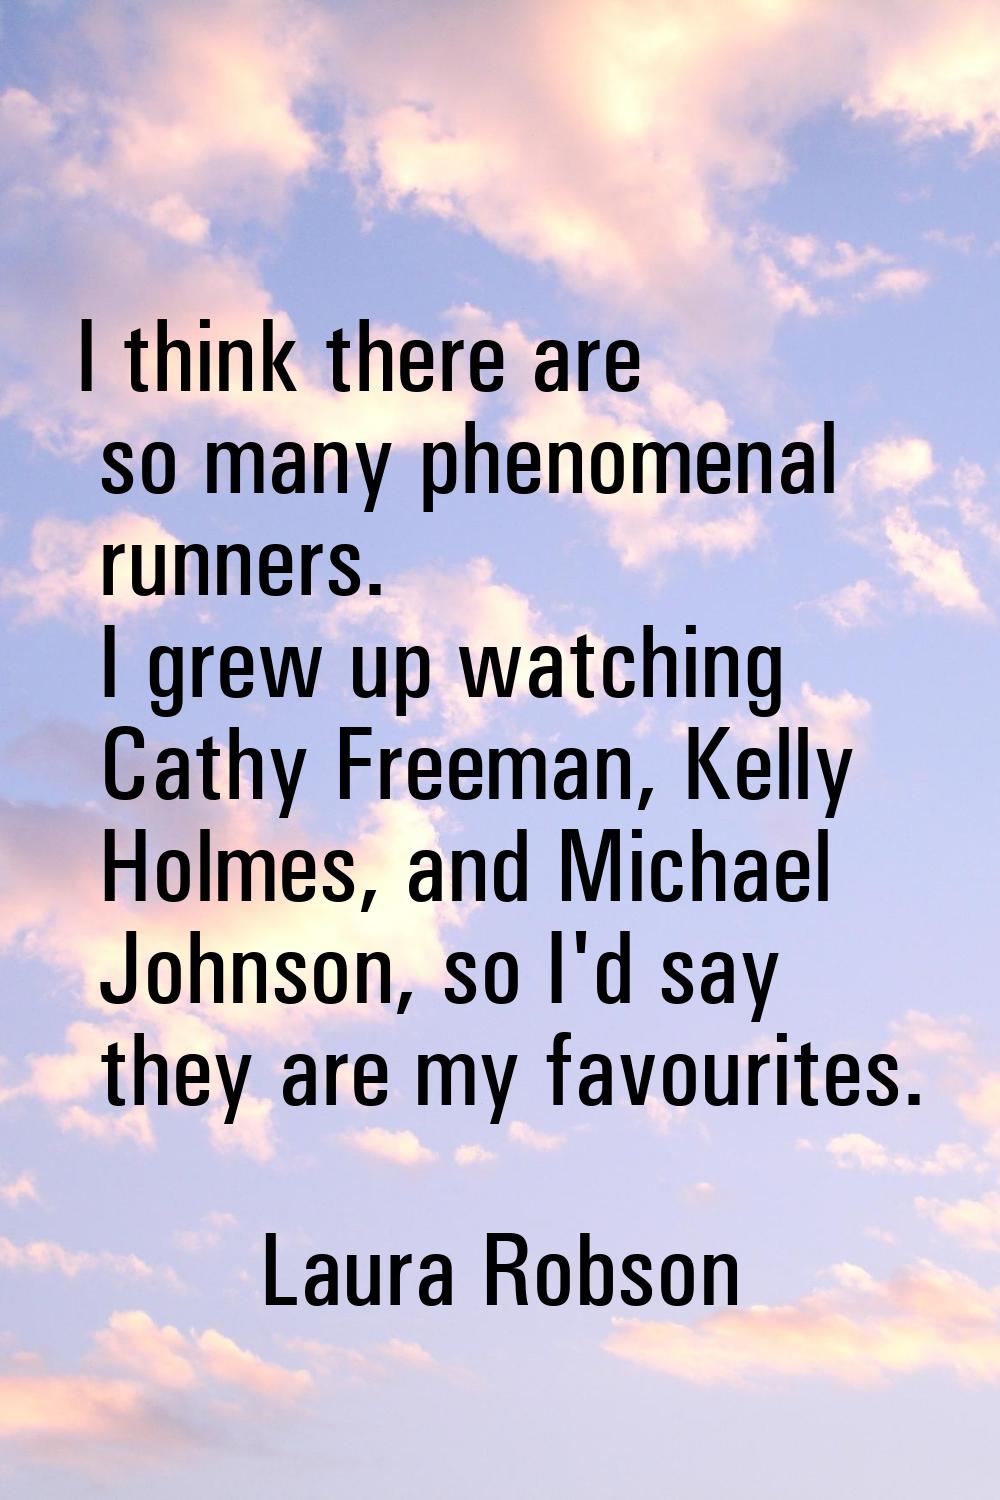 I think there are so many phenomenal runners. I grew up watching Cathy Freeman, Kelly Holmes, and M